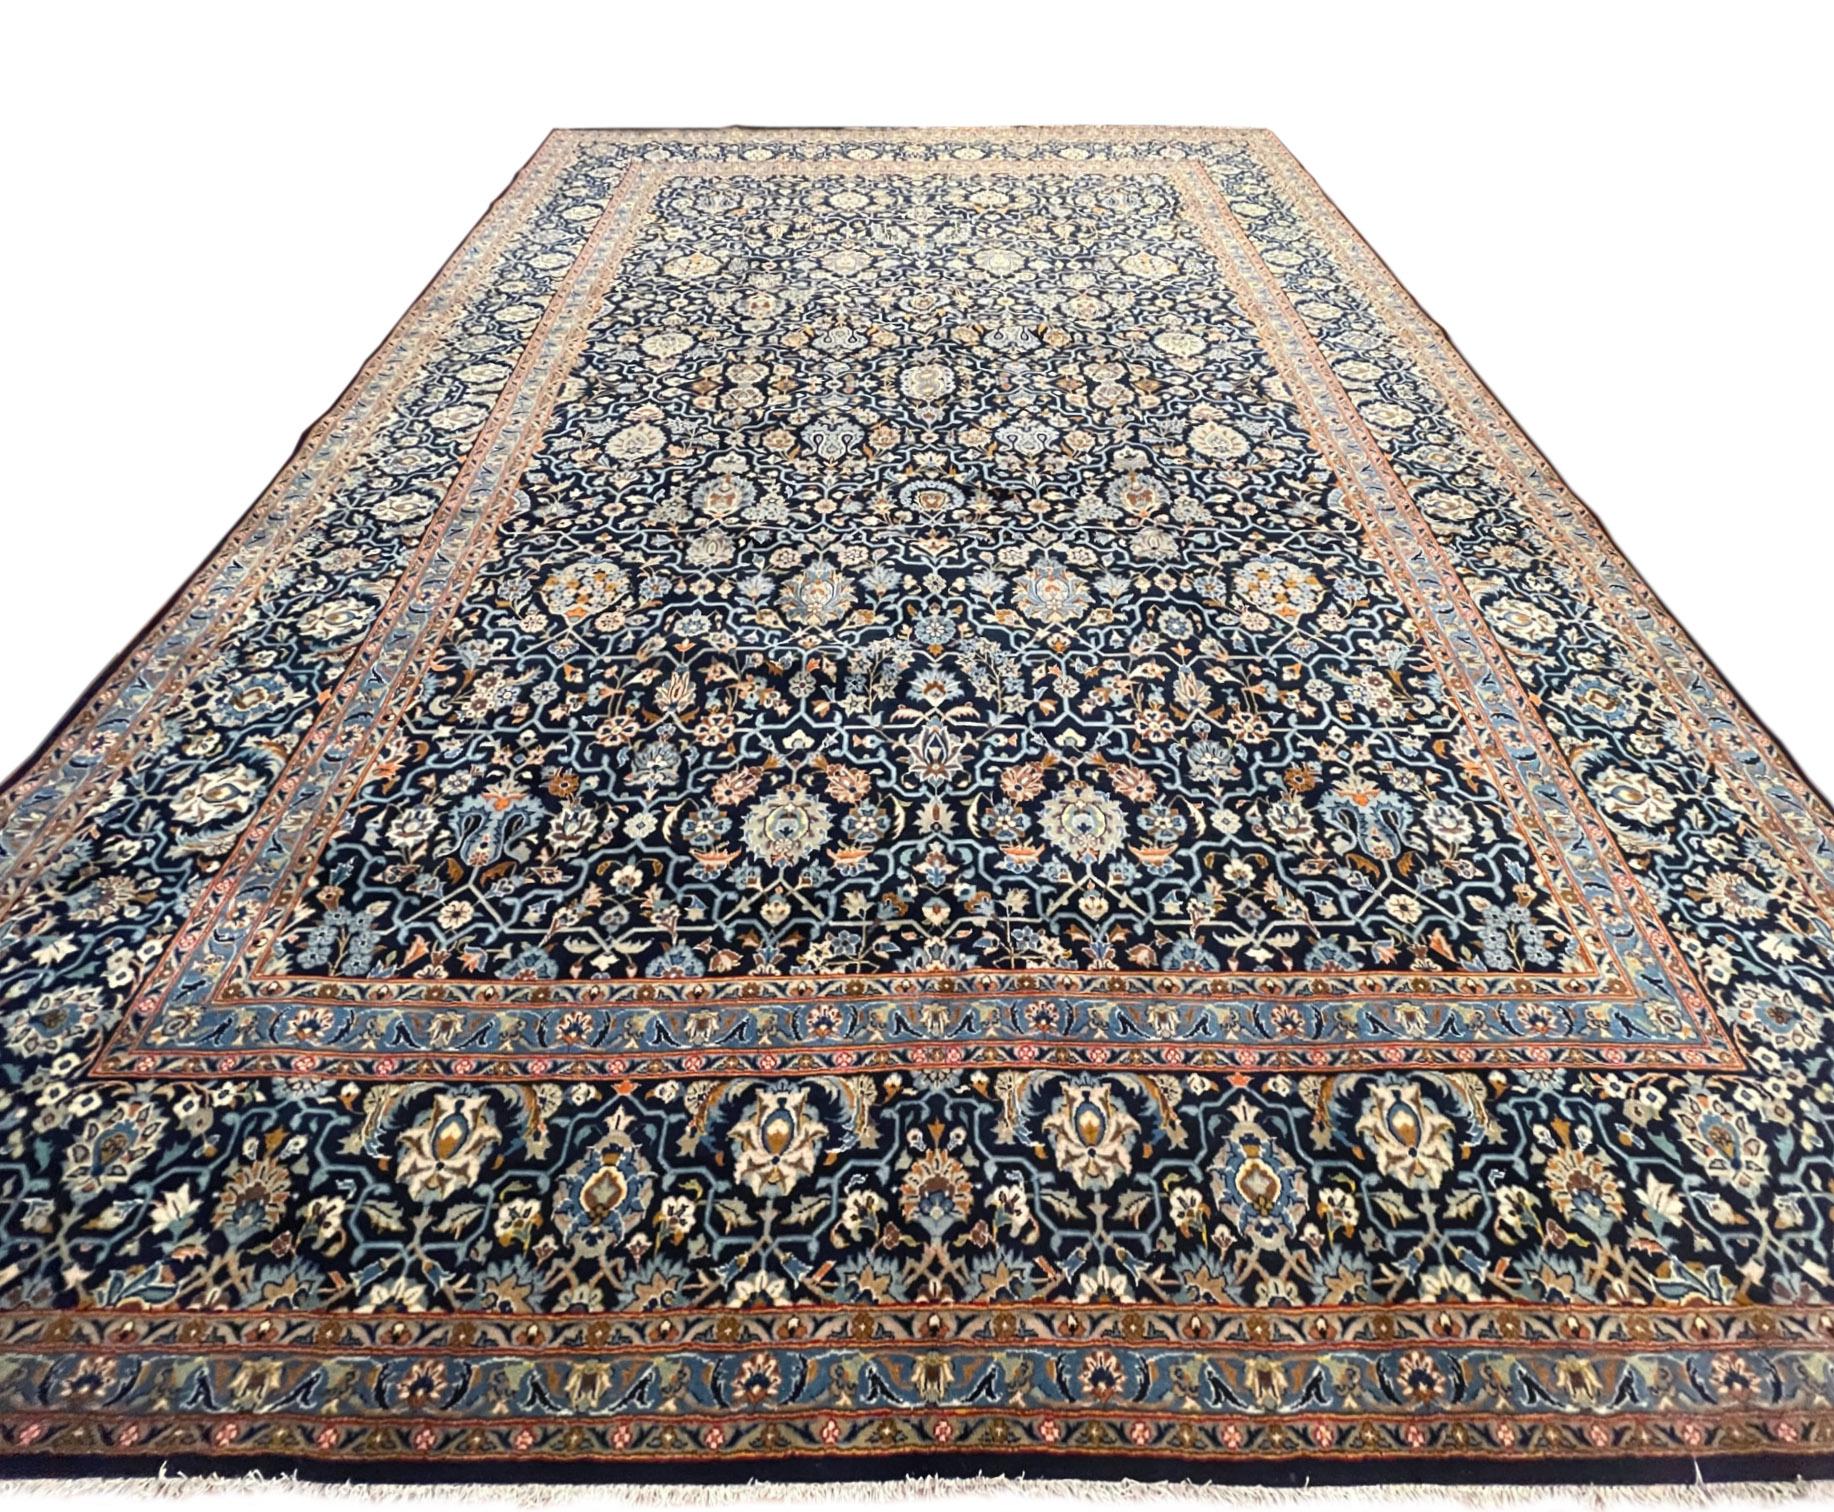 This handmade rug originally from Kashan which are one of the traditional classifications of Persian rugs. The weavers in Kashan produce high quality rugs with high standards of design and technique. This piece has wool pile with cotton foundation.